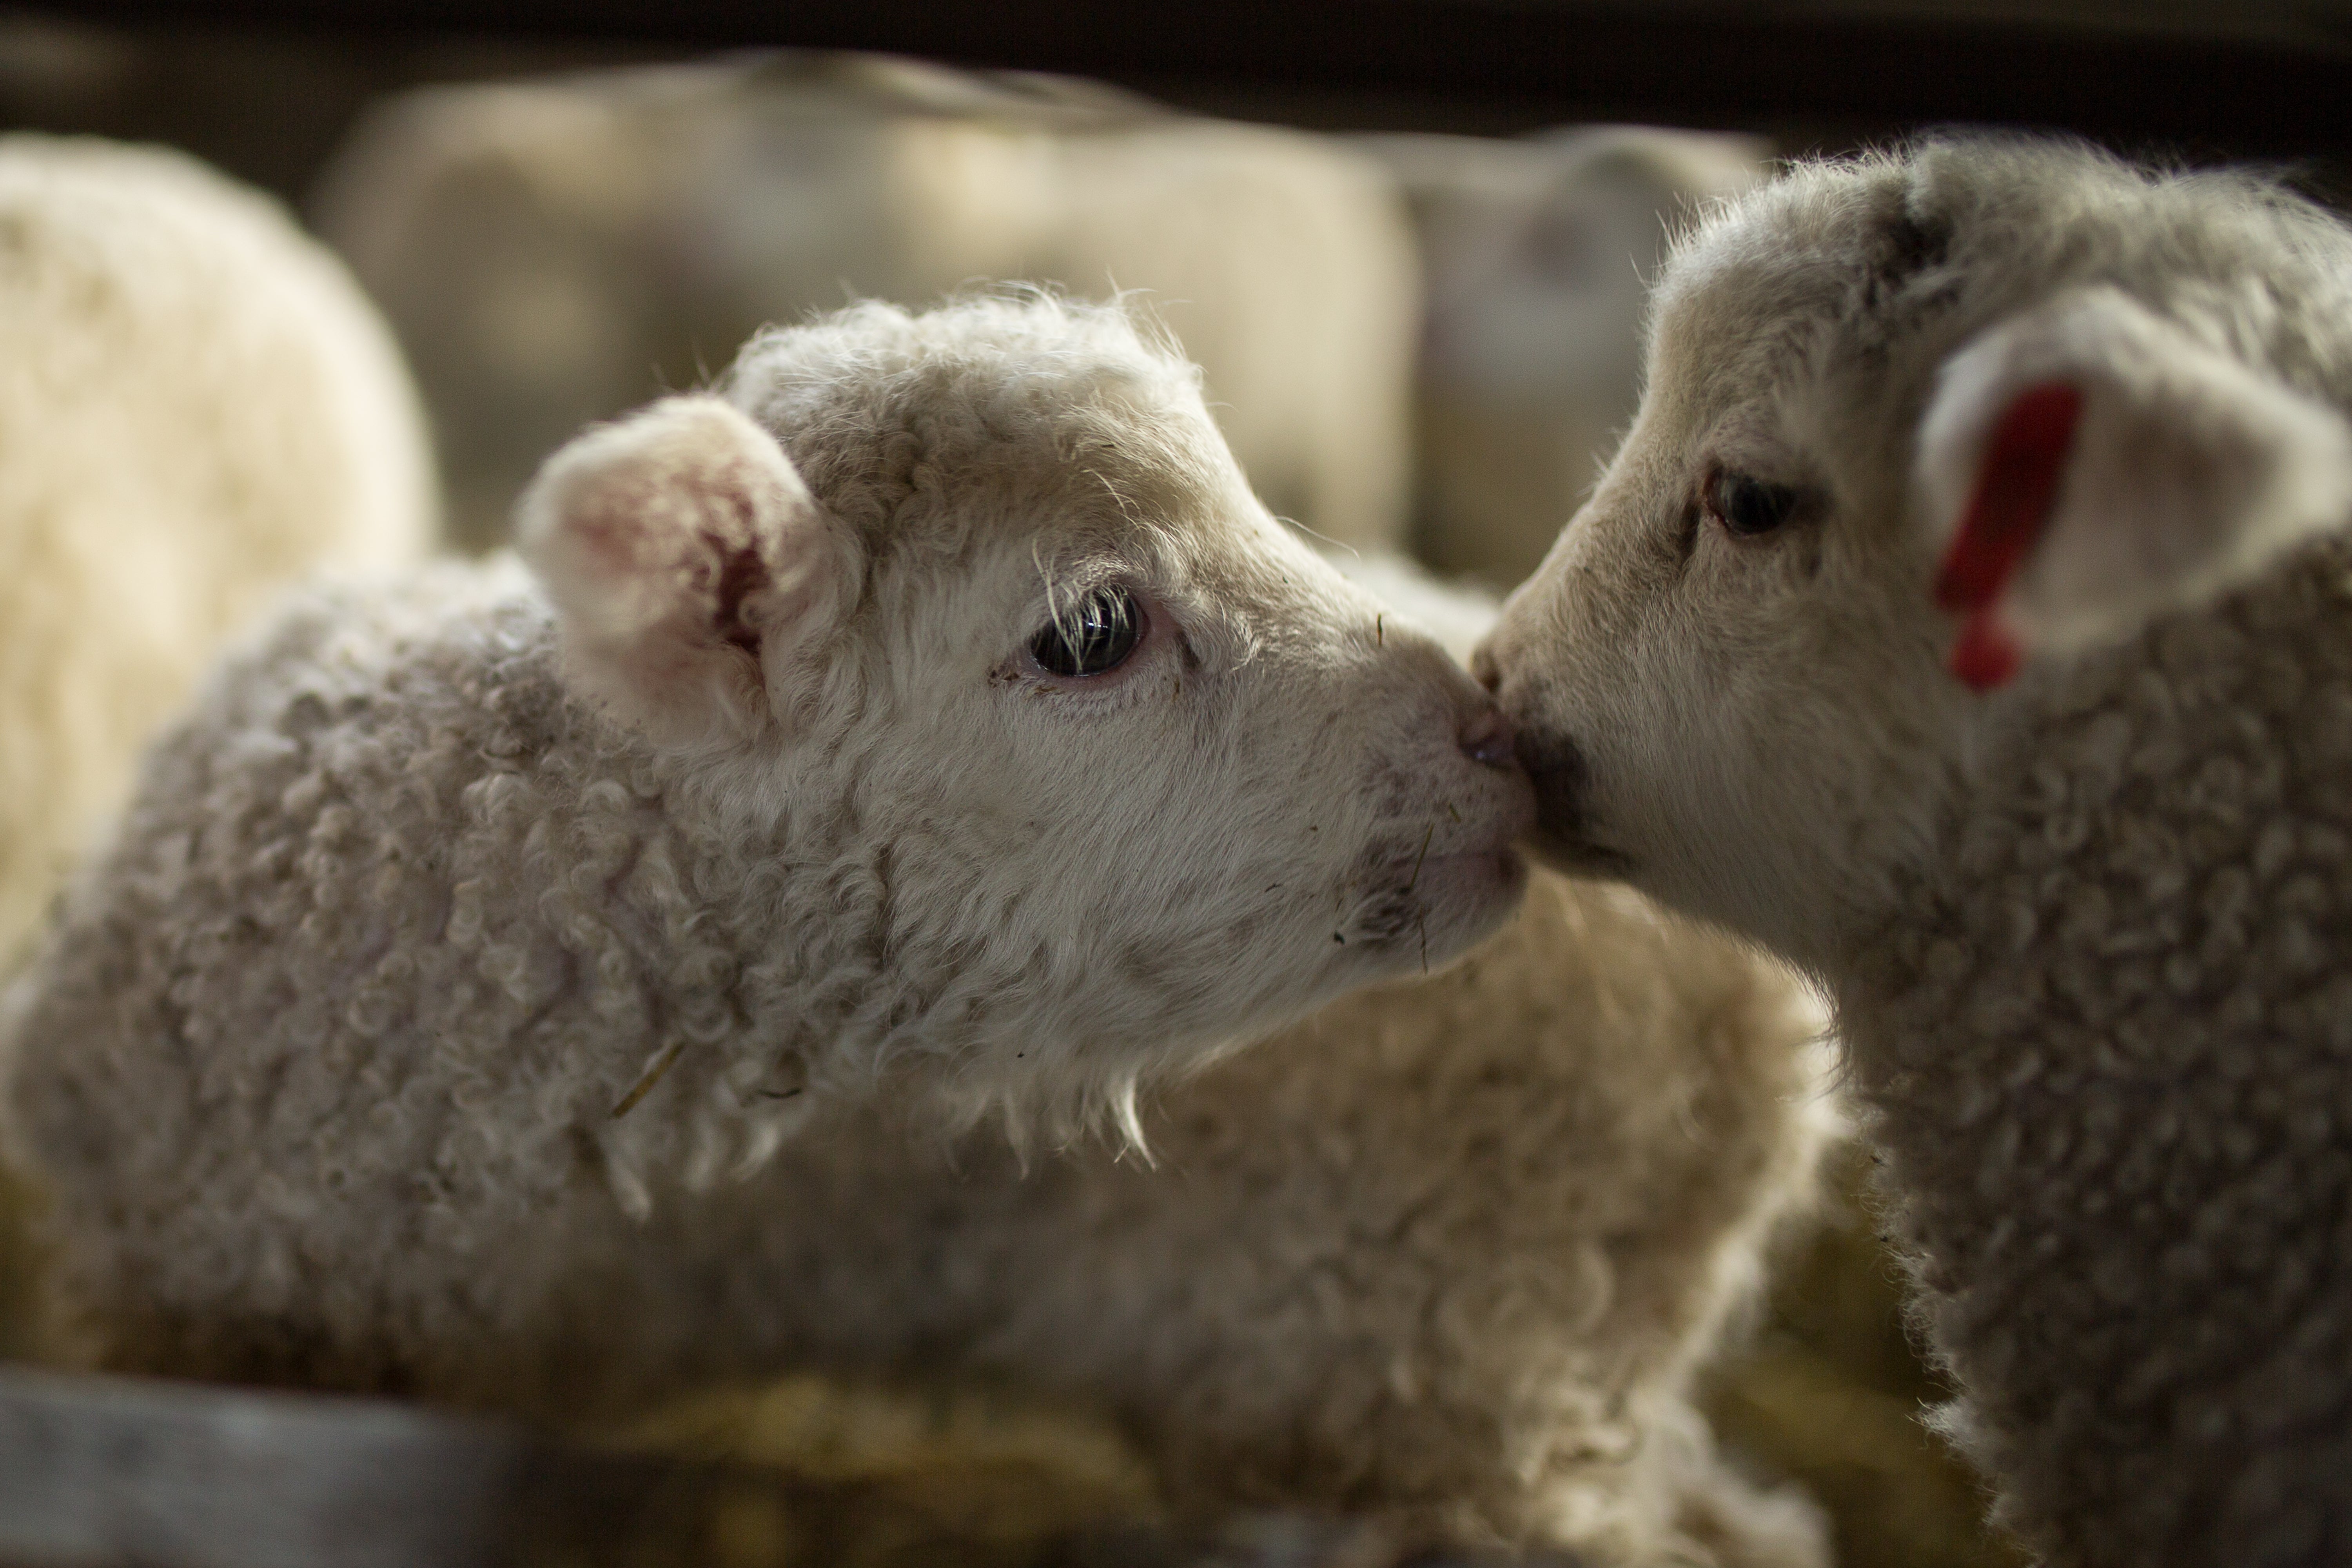 Lamb meat is most profitable around Easter time, so farmers induce pregnancies unnaturally early in the year